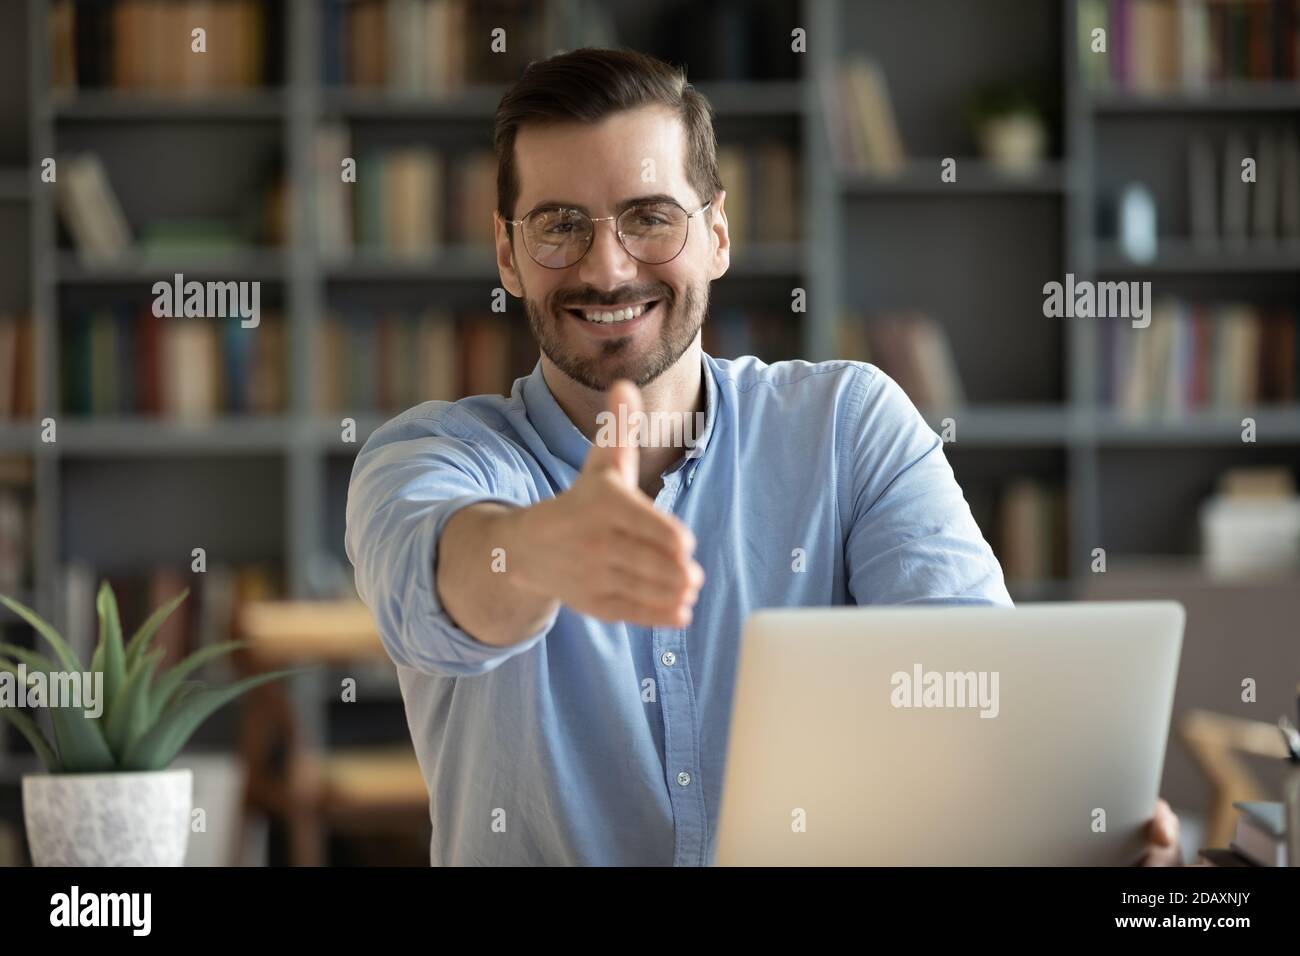 HR agent greeting applicant extend hand for handshake Stock Photo